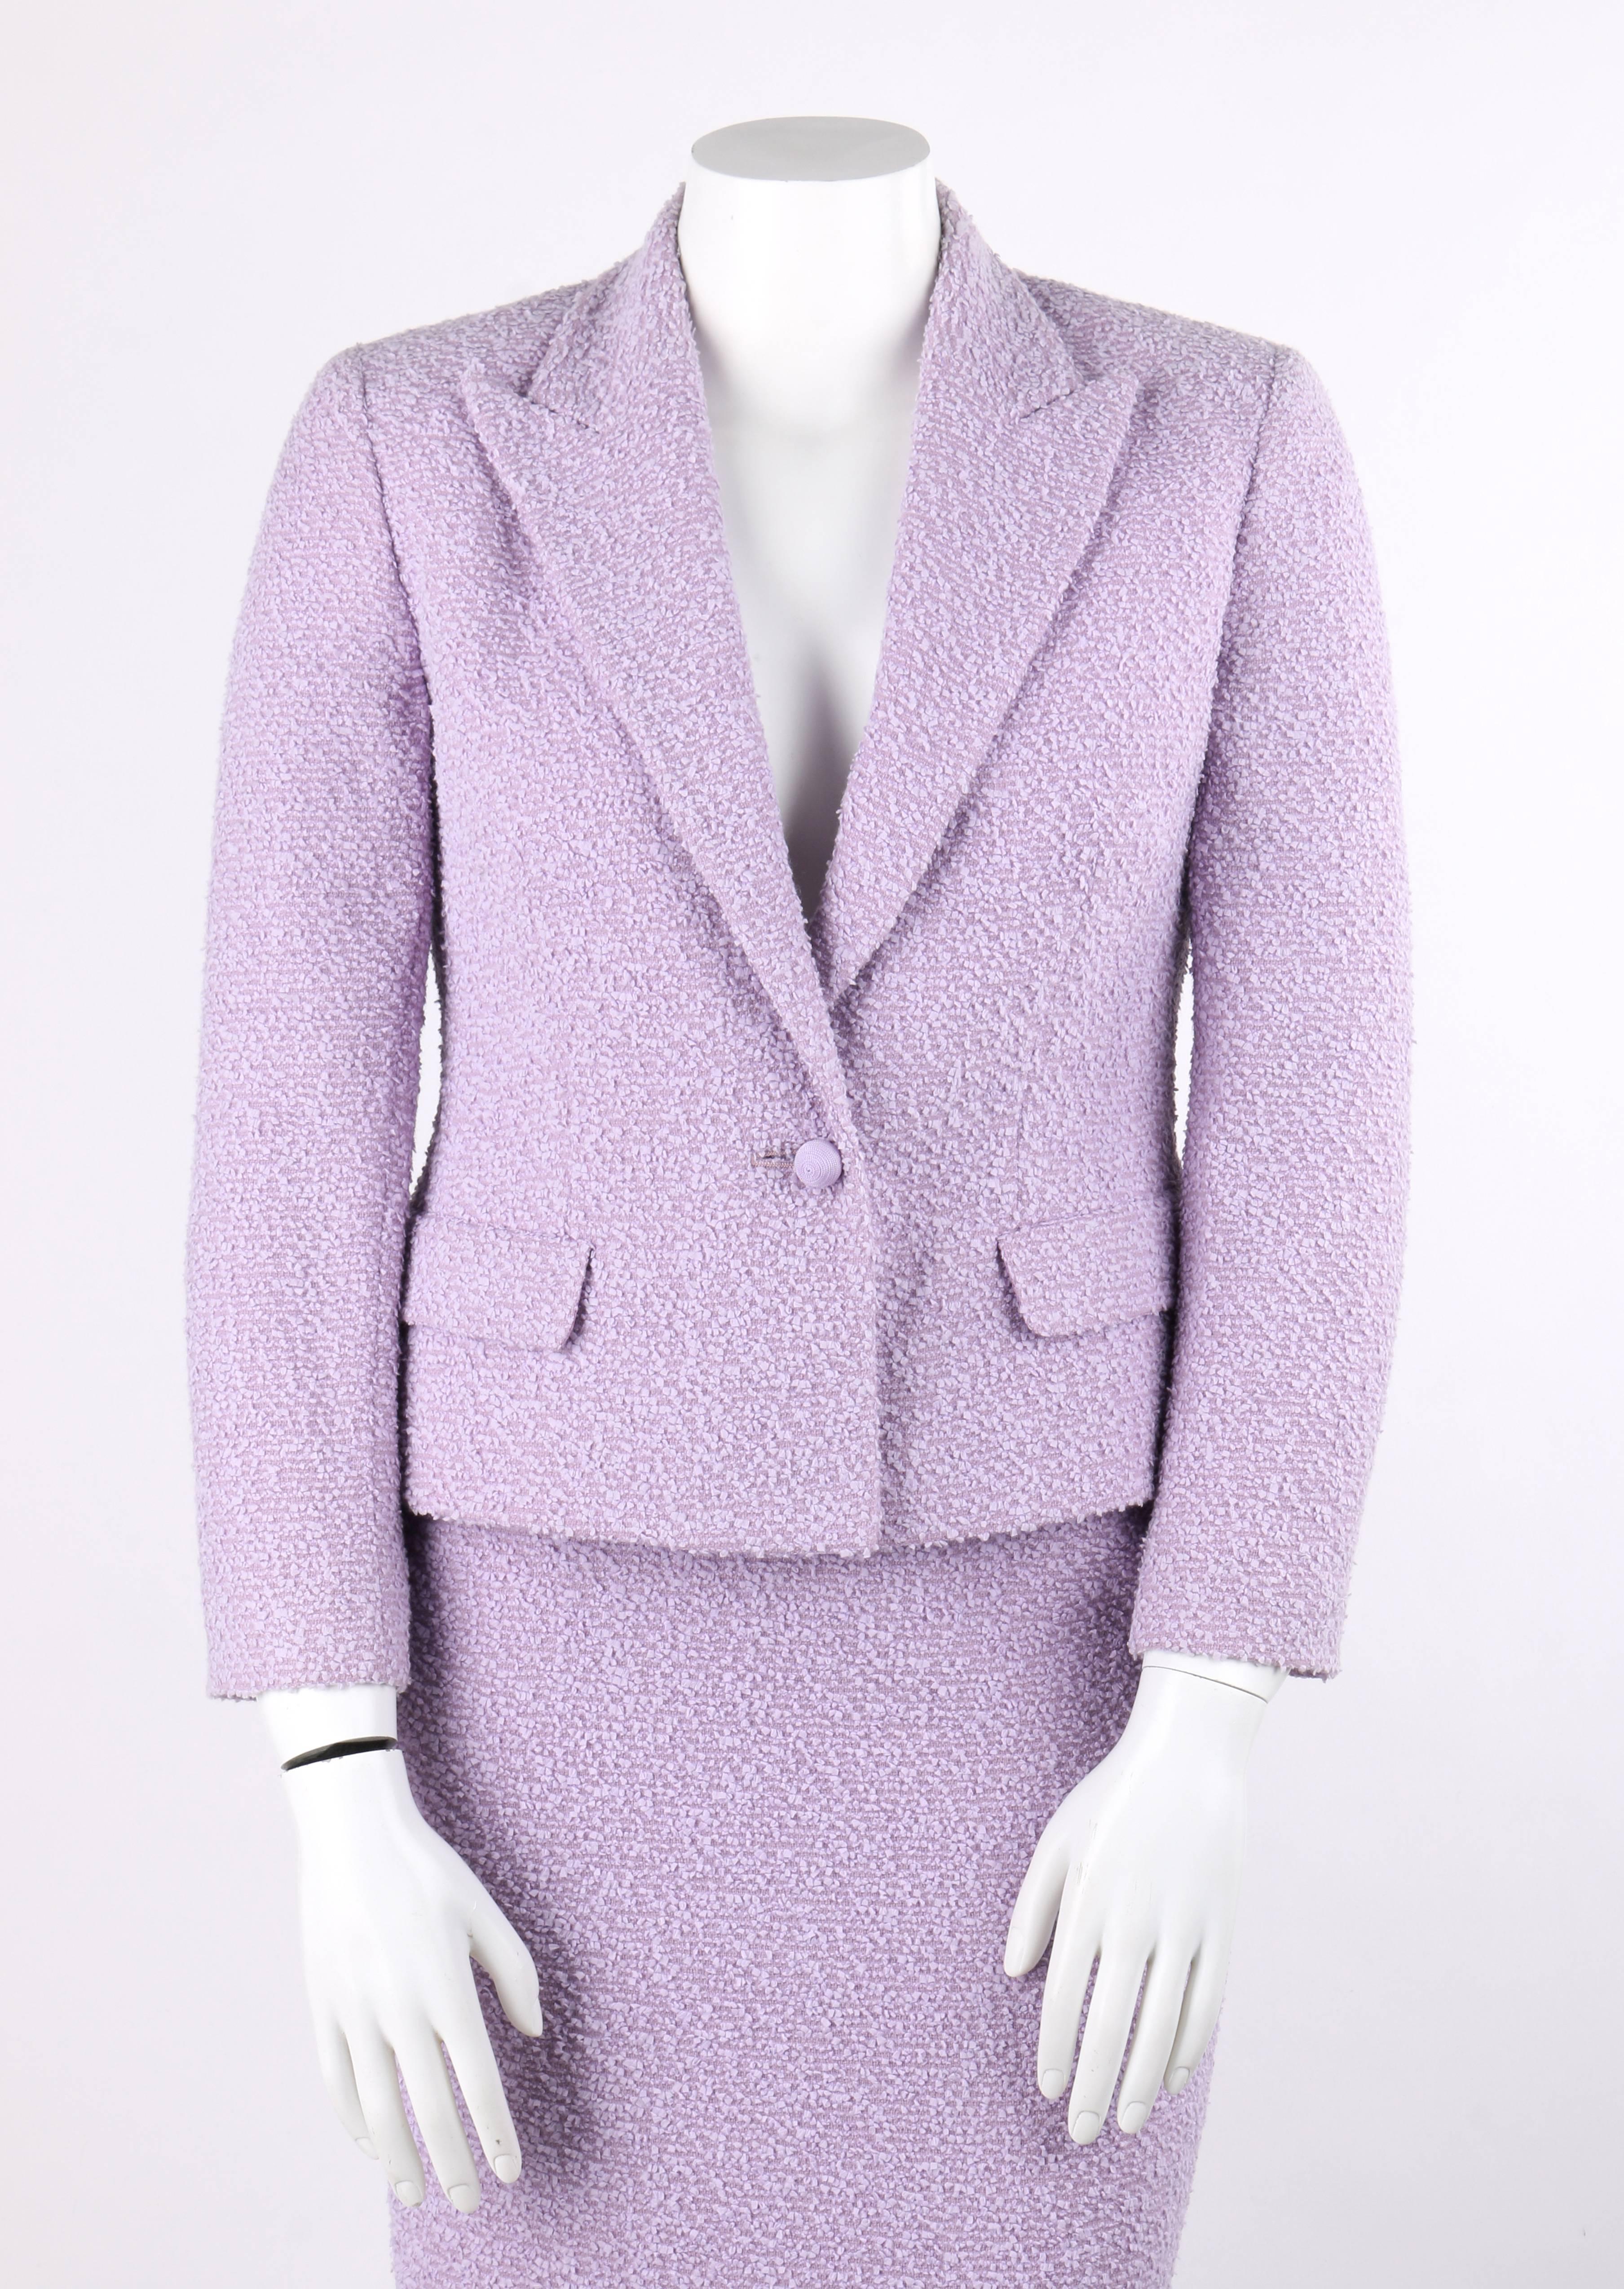 Valentino Miss V c.1990's two piece lavender wool boucle blazer skirt suit set. Designed by Valentino Garavani. Peaked lapel collar blazer. Center front single spherical covered button closure. Long sleeves. Two front hip pockets with flap. Pockets